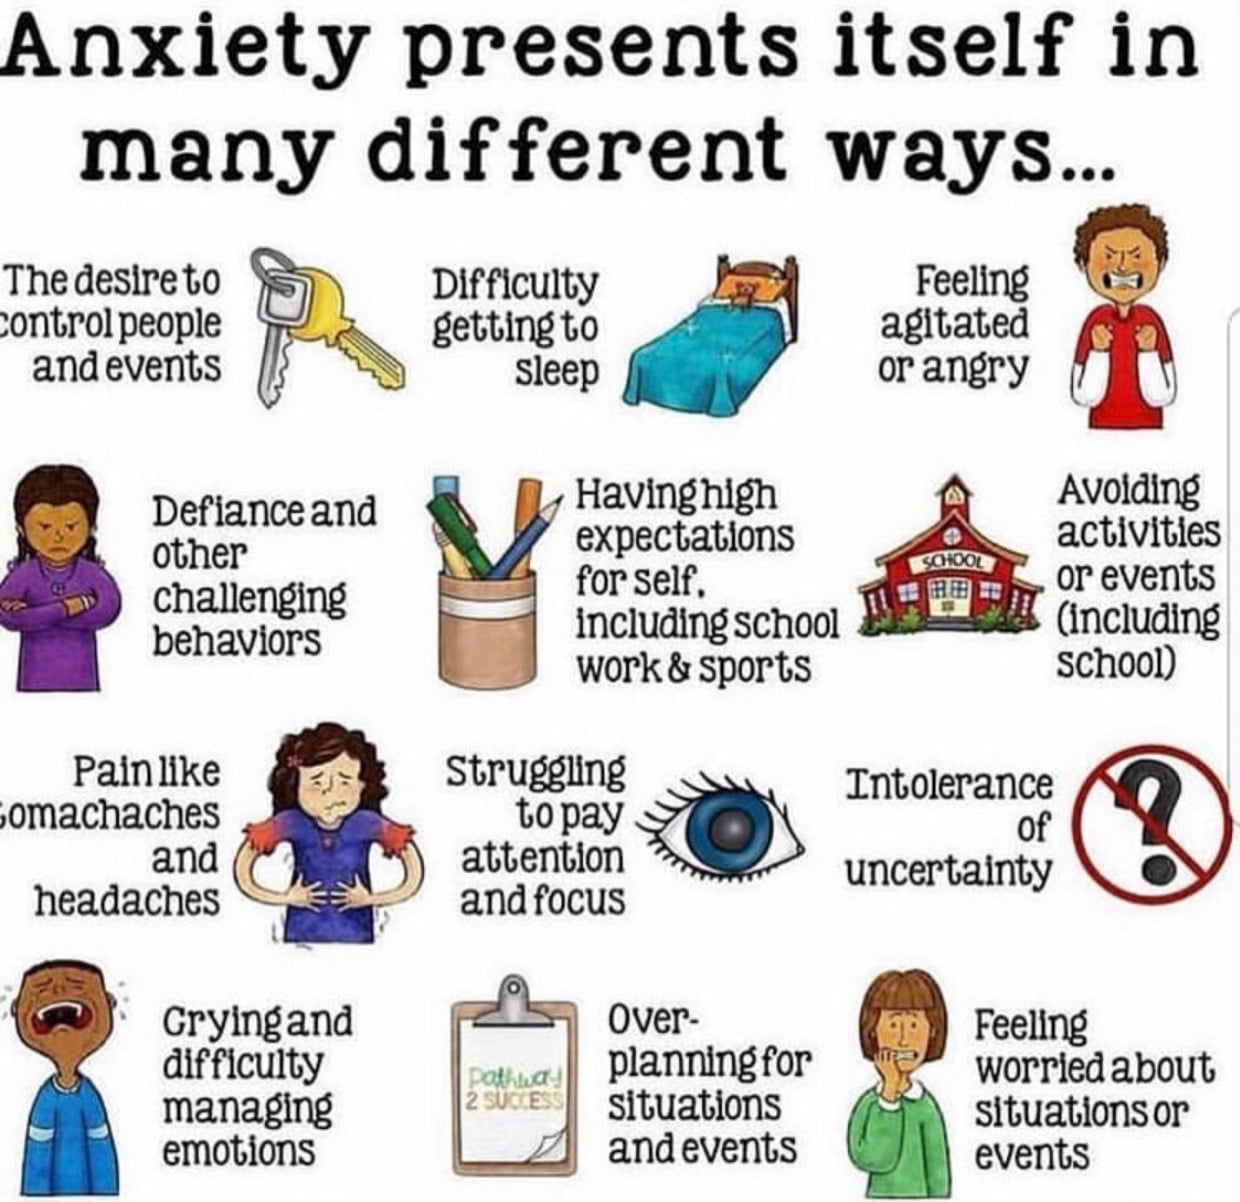 The Struggle is Real: Living With Anxiety